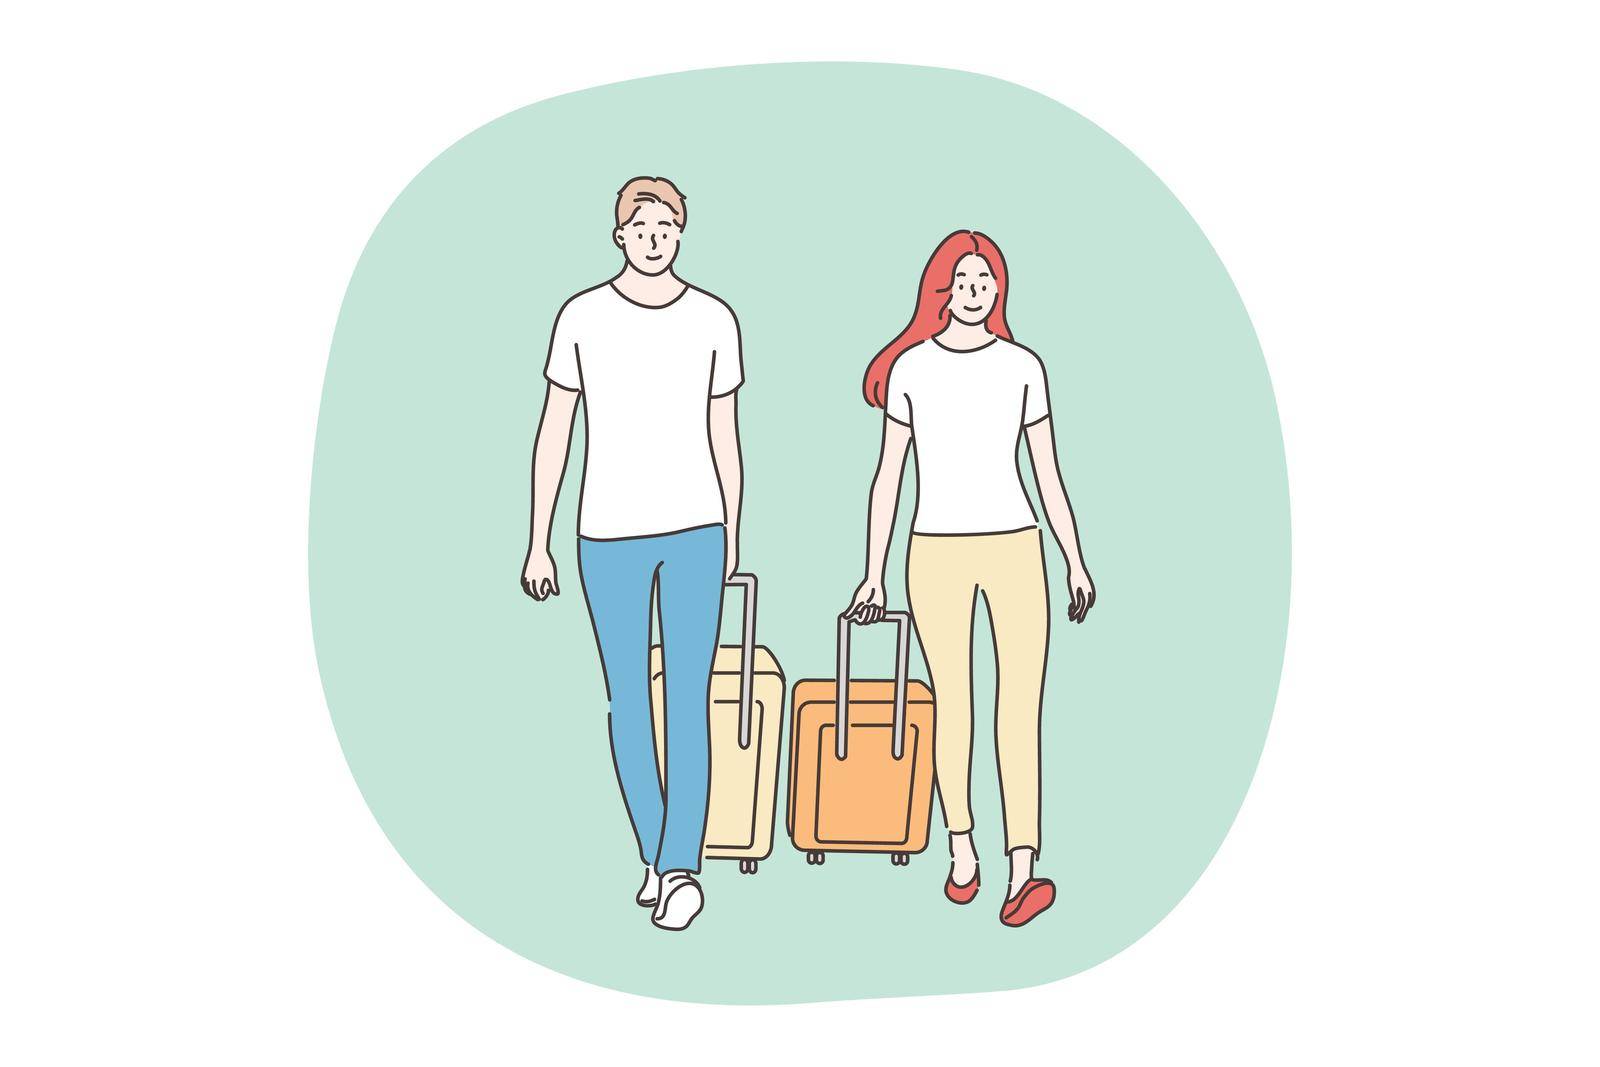 Holiday, travelling, tourism concept. Couple man woman boyfriend girlfriend travelers tourists walk with baggage luggage together. Travel abroad on vacation adventure lifestyle summertime recreation.